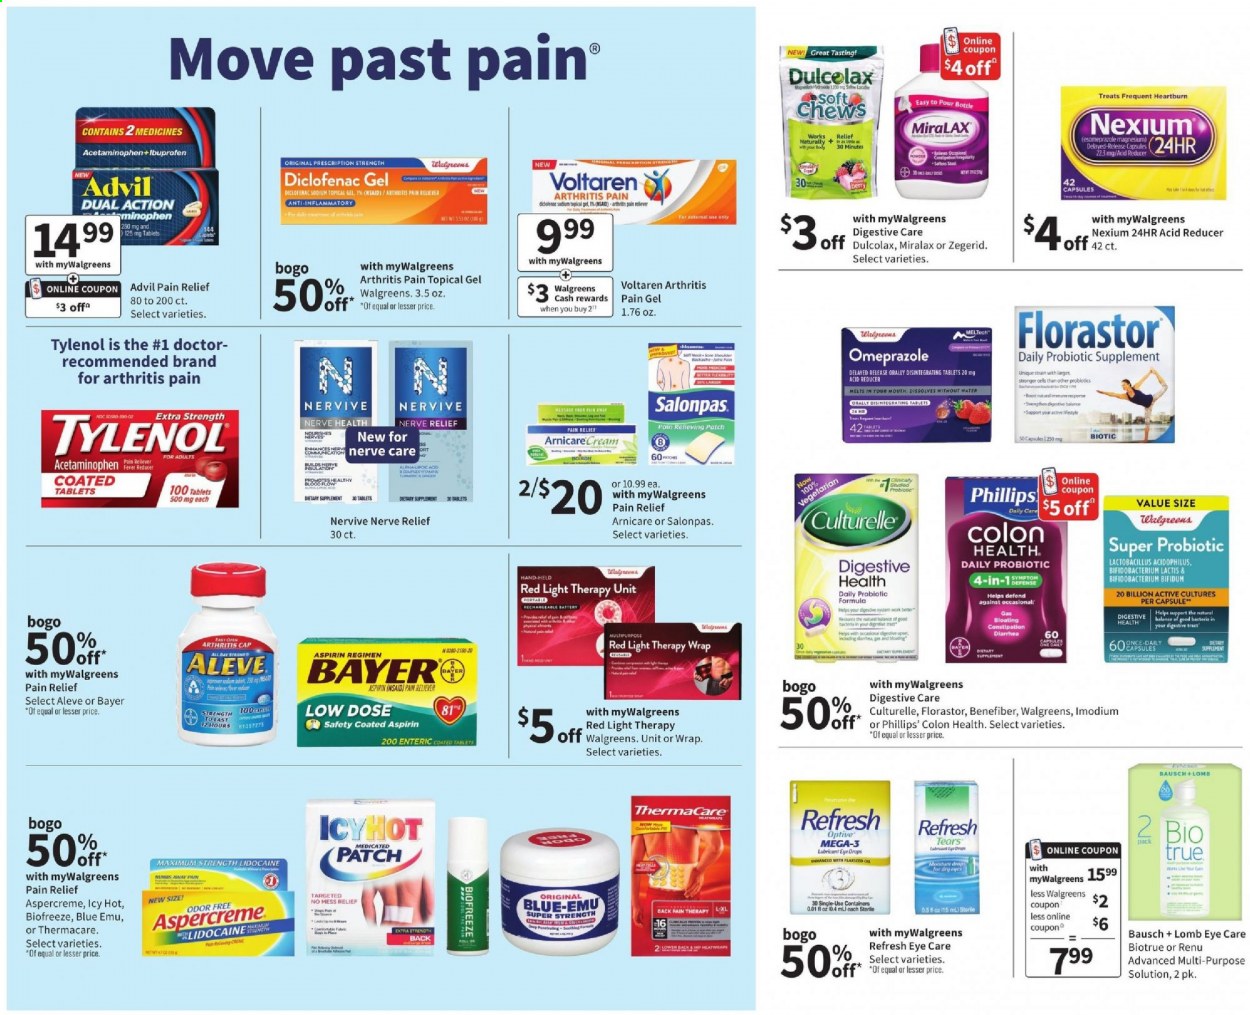 thumbnail - Walgreens Flyer - 05/02/2021 - 05/08/2021 - Sales products - chewing gum, pin, rechargeable battery, pain relief, Aleve, Culturelle, Dulcolax, MiraLAX, Thermacare, Tylenol, Ibuprofen, Imodium, probiotics, Aspercreme, Nexium, Biotrue, eye drops, Advil Rapid, Low Dose, aspirin, Bayer, dietary supplement. Page 21.